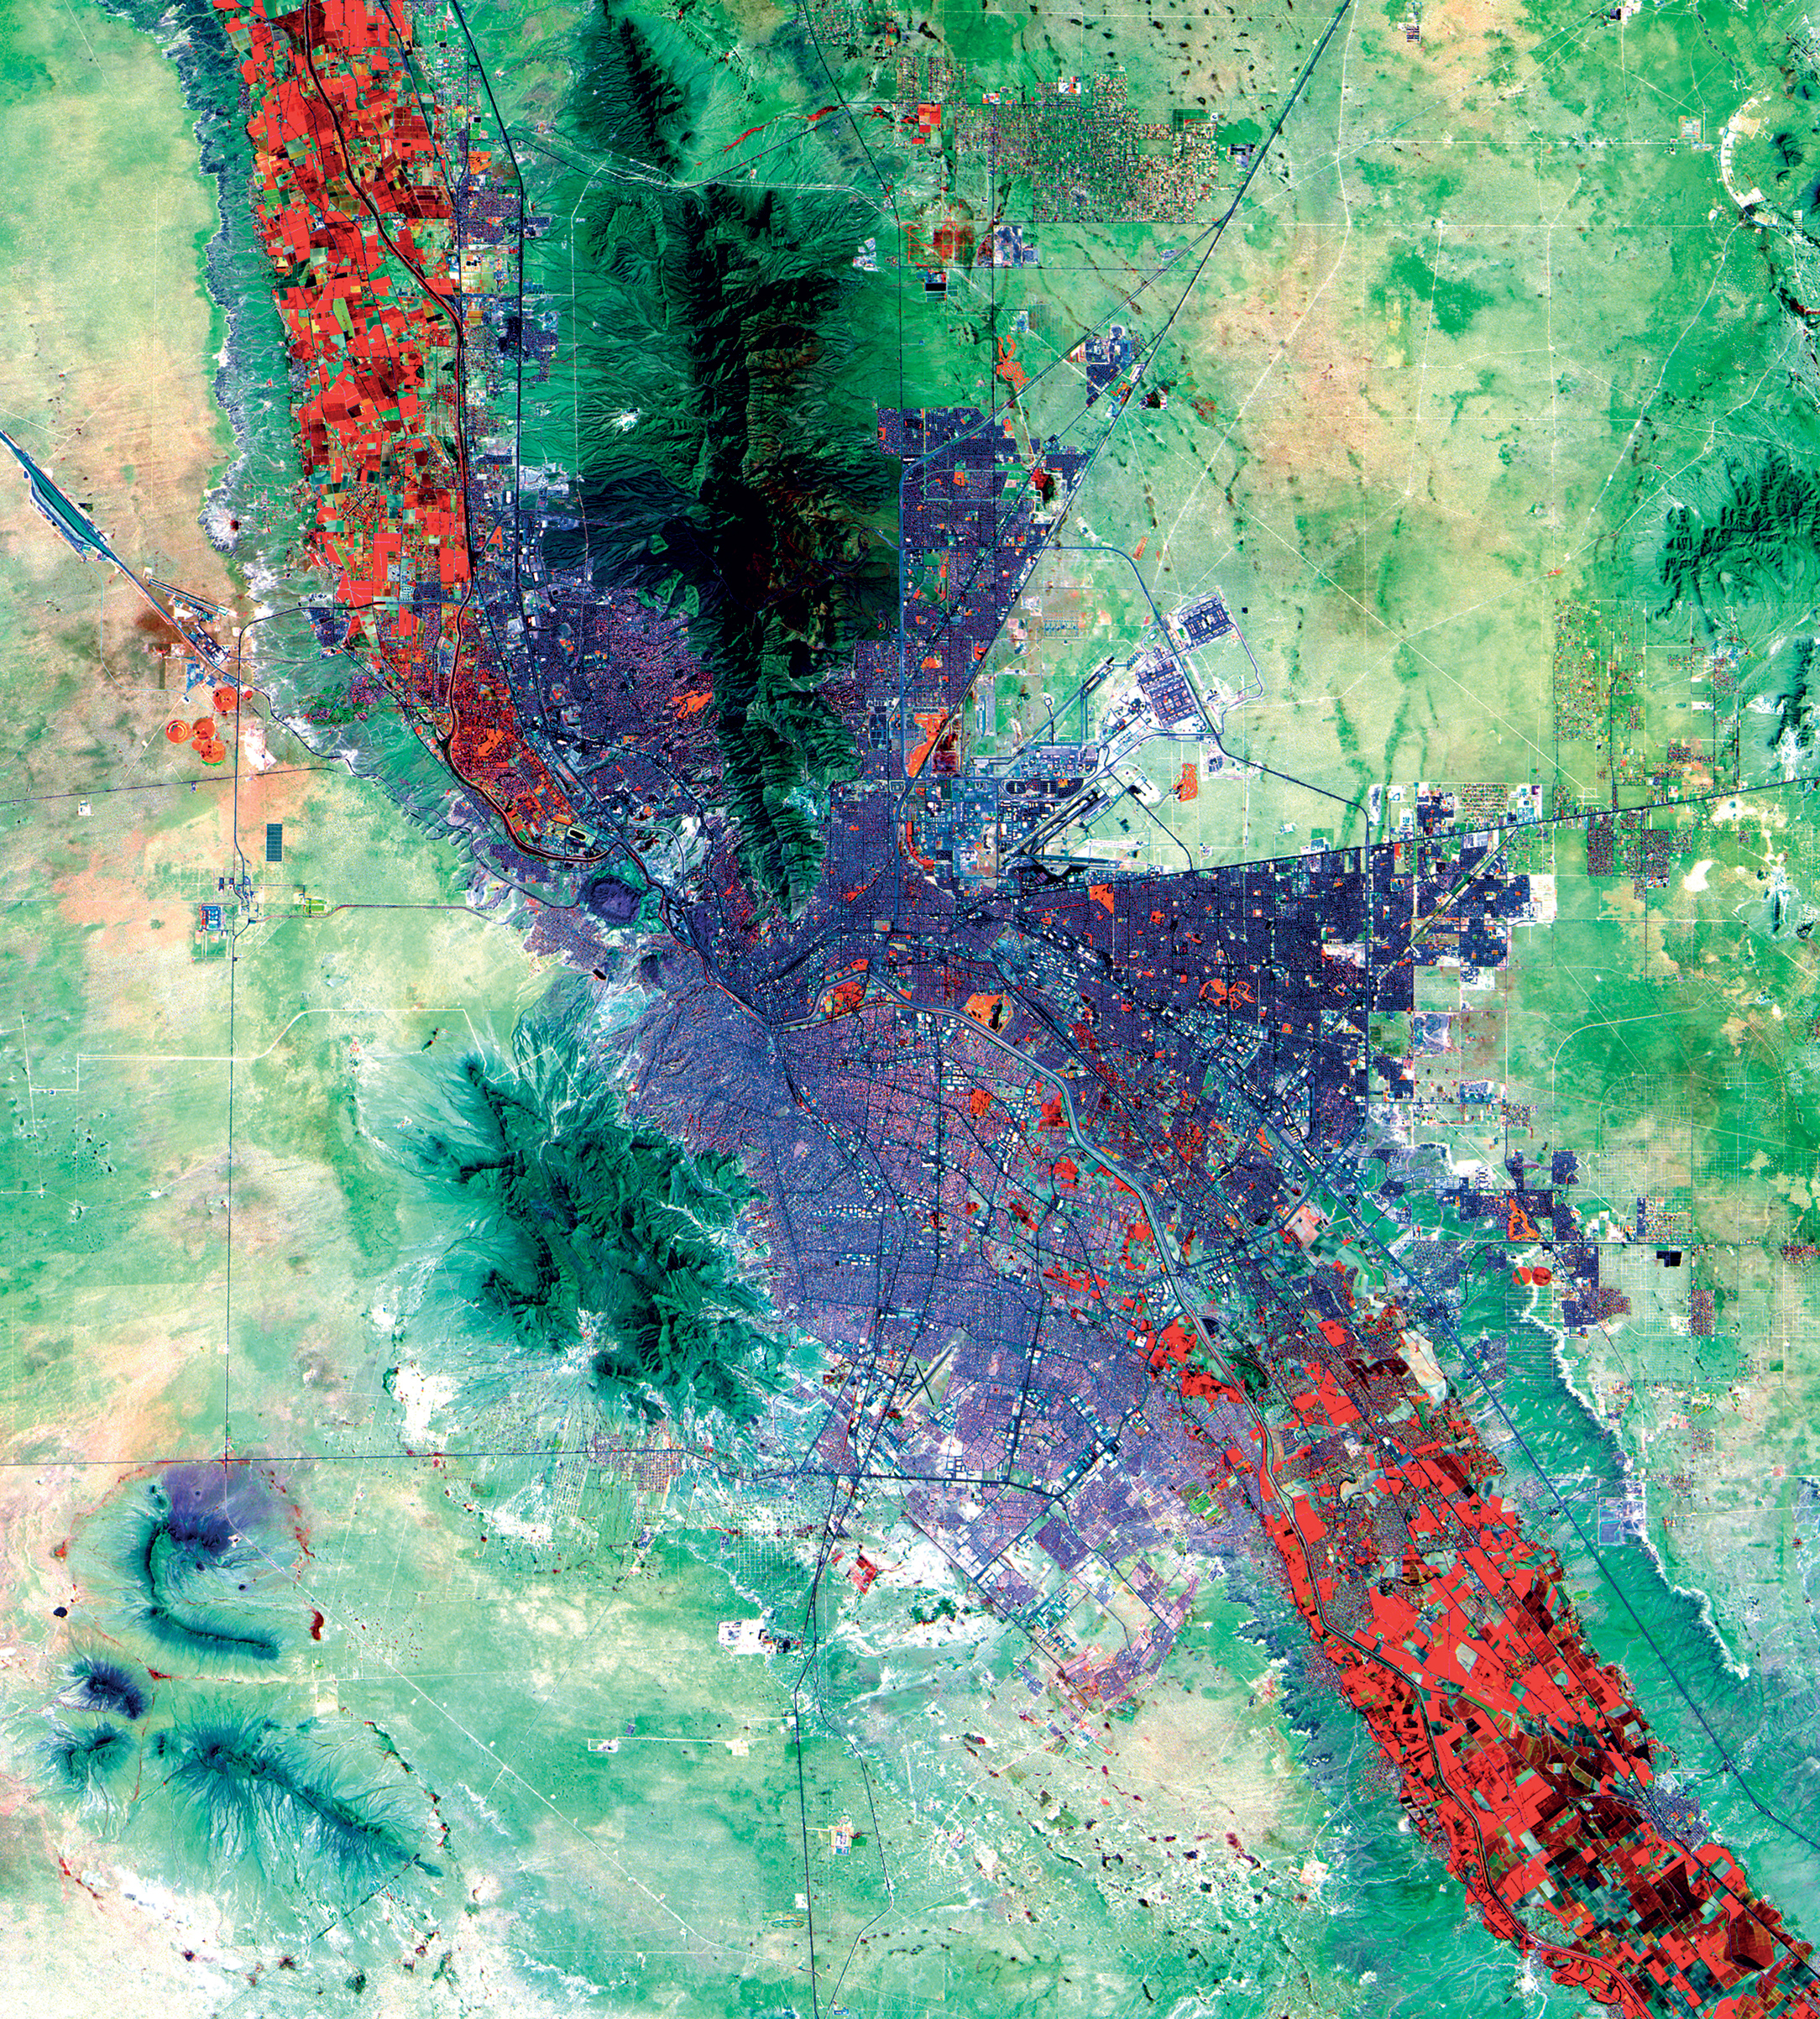 <strong>El Paso, Texas, U.S. and Ciudad Juárez, Chihuahua, Mexico</strong> <em>1:271,000</em> The two cities appear in purple along the Mexican and U.S. border. El Paso, Texas, is concentrated between the border and the Franklin Mountains (in dark green). Ciudad Juárez, Chihuahua, is south of the border. The differences in the two city’s street layouts, infrastructure, building densities and urban materials are clearly evident and shown as various shades of purple. Highly vegetated riparian areas appear in red. (Landsat OLI/TIRS)